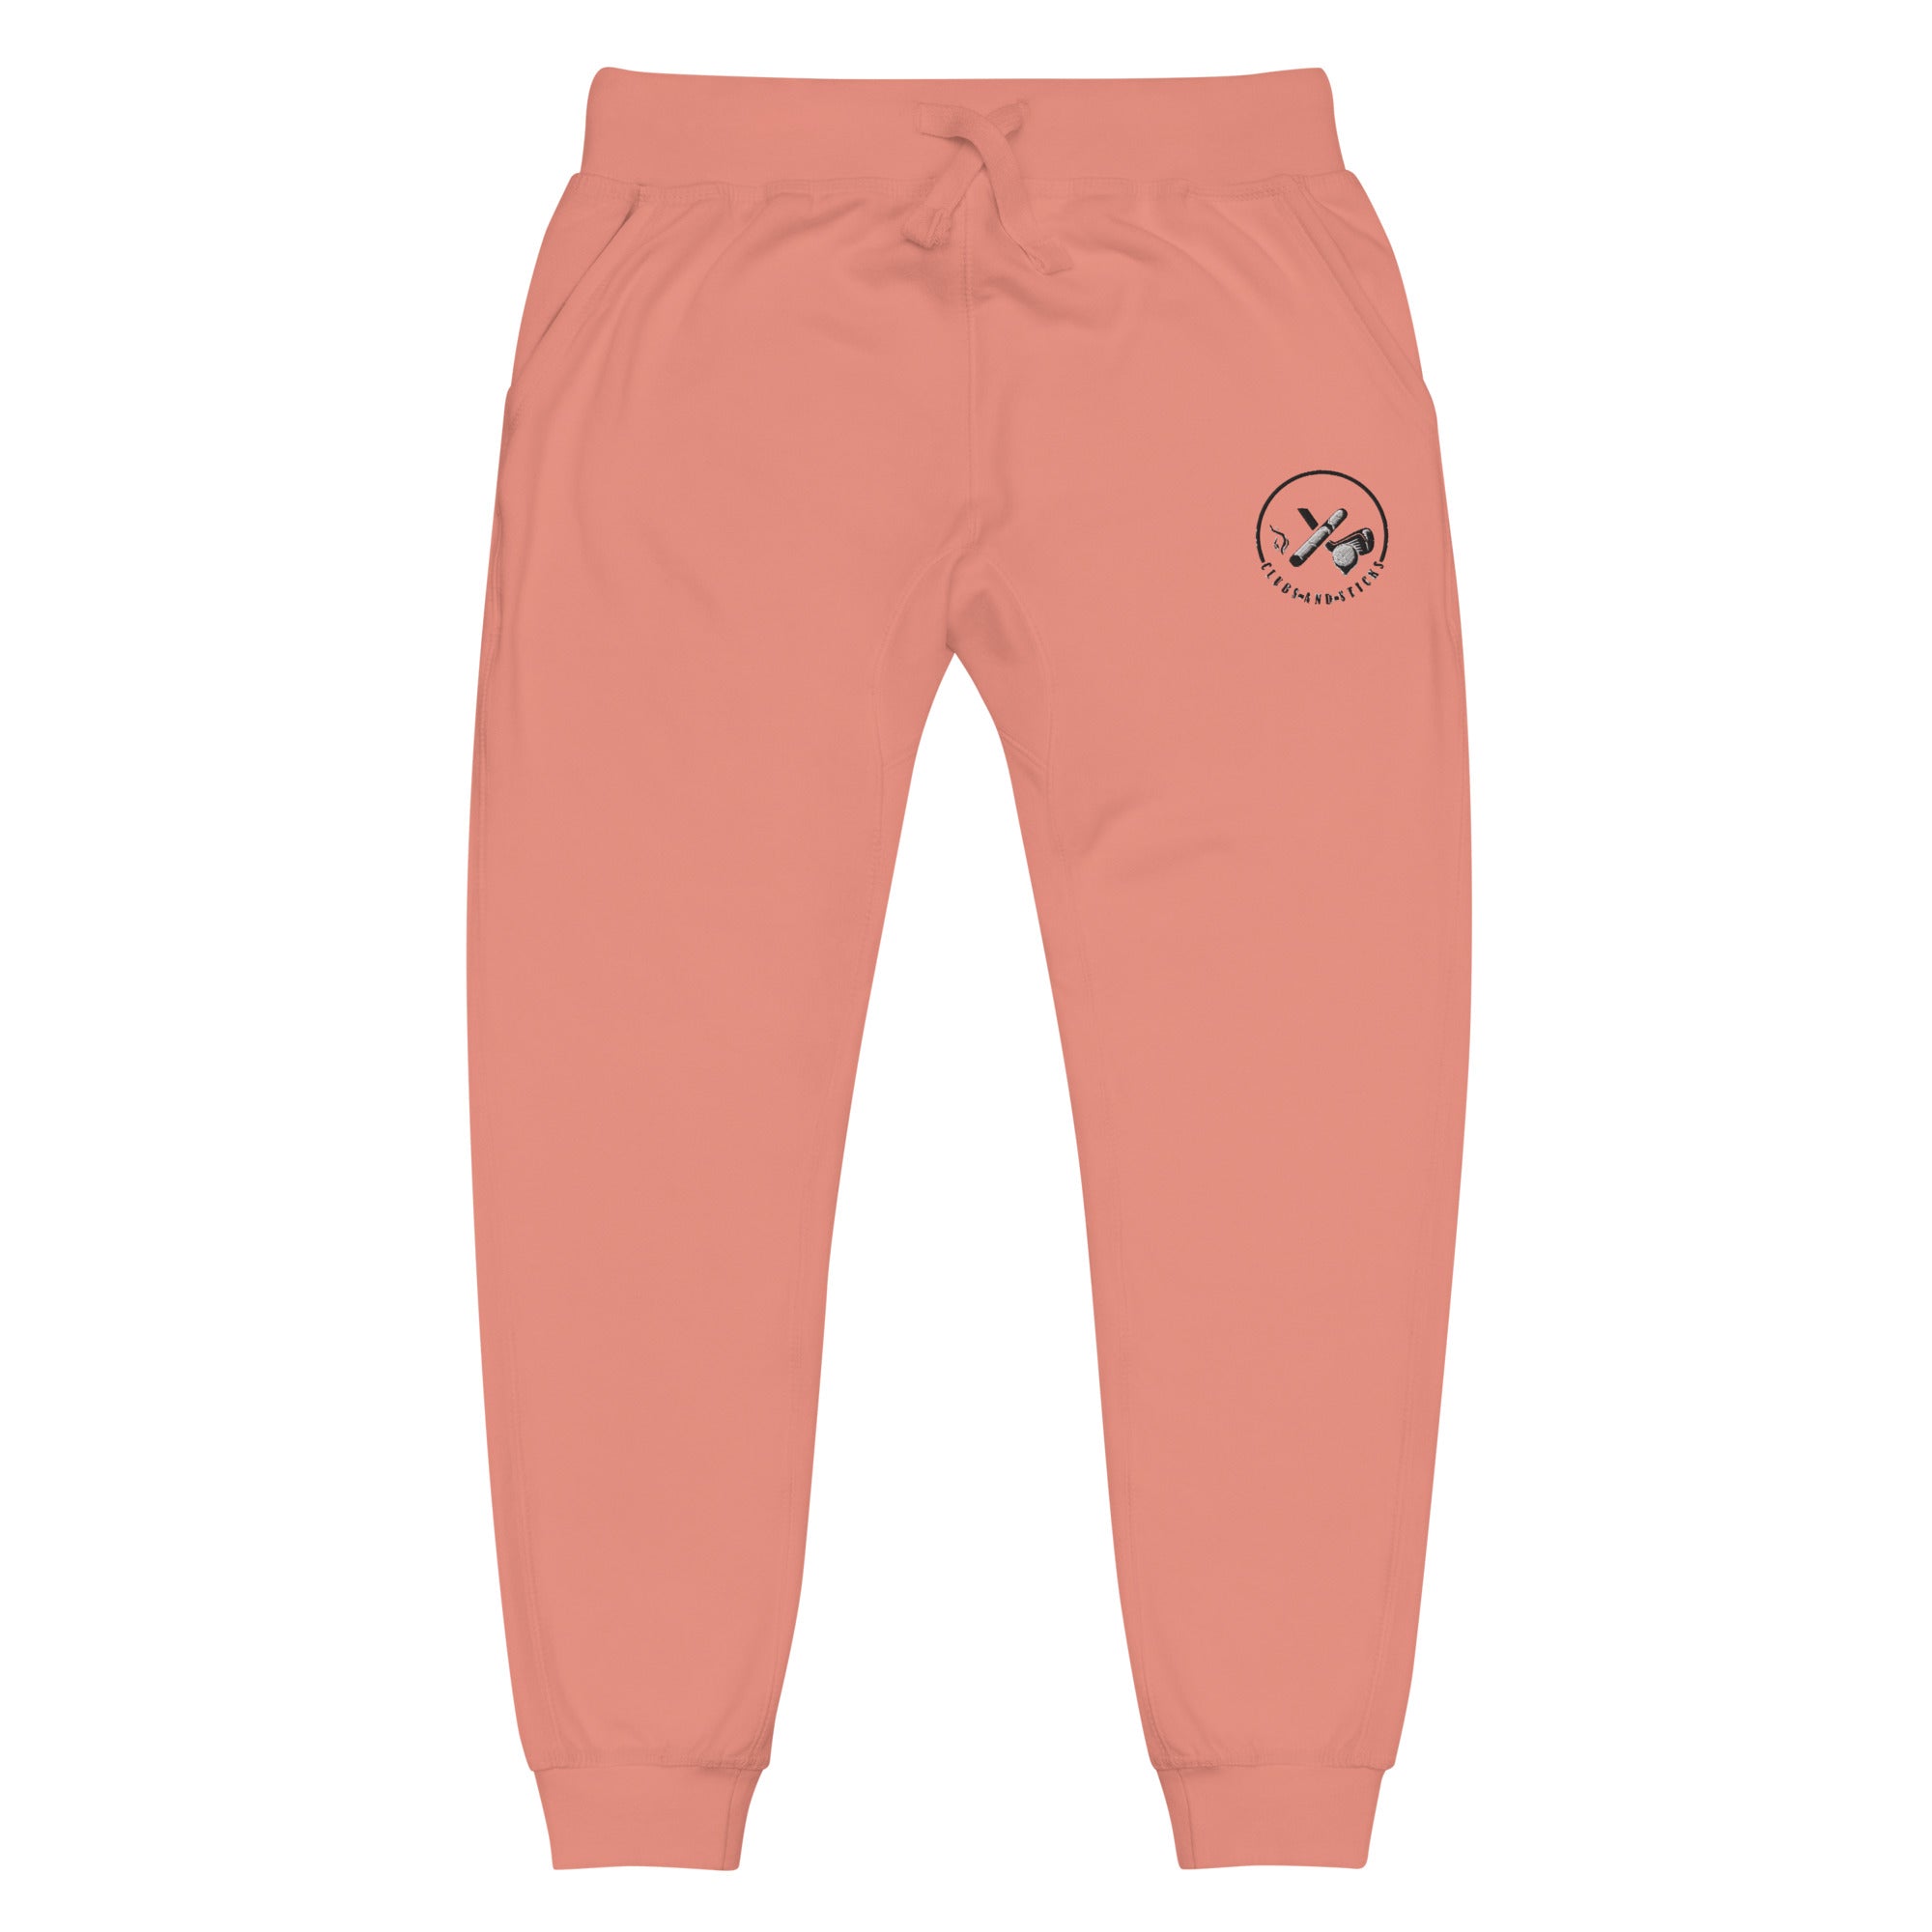 Clubs and Sticks Embroidered fleece sweatpants